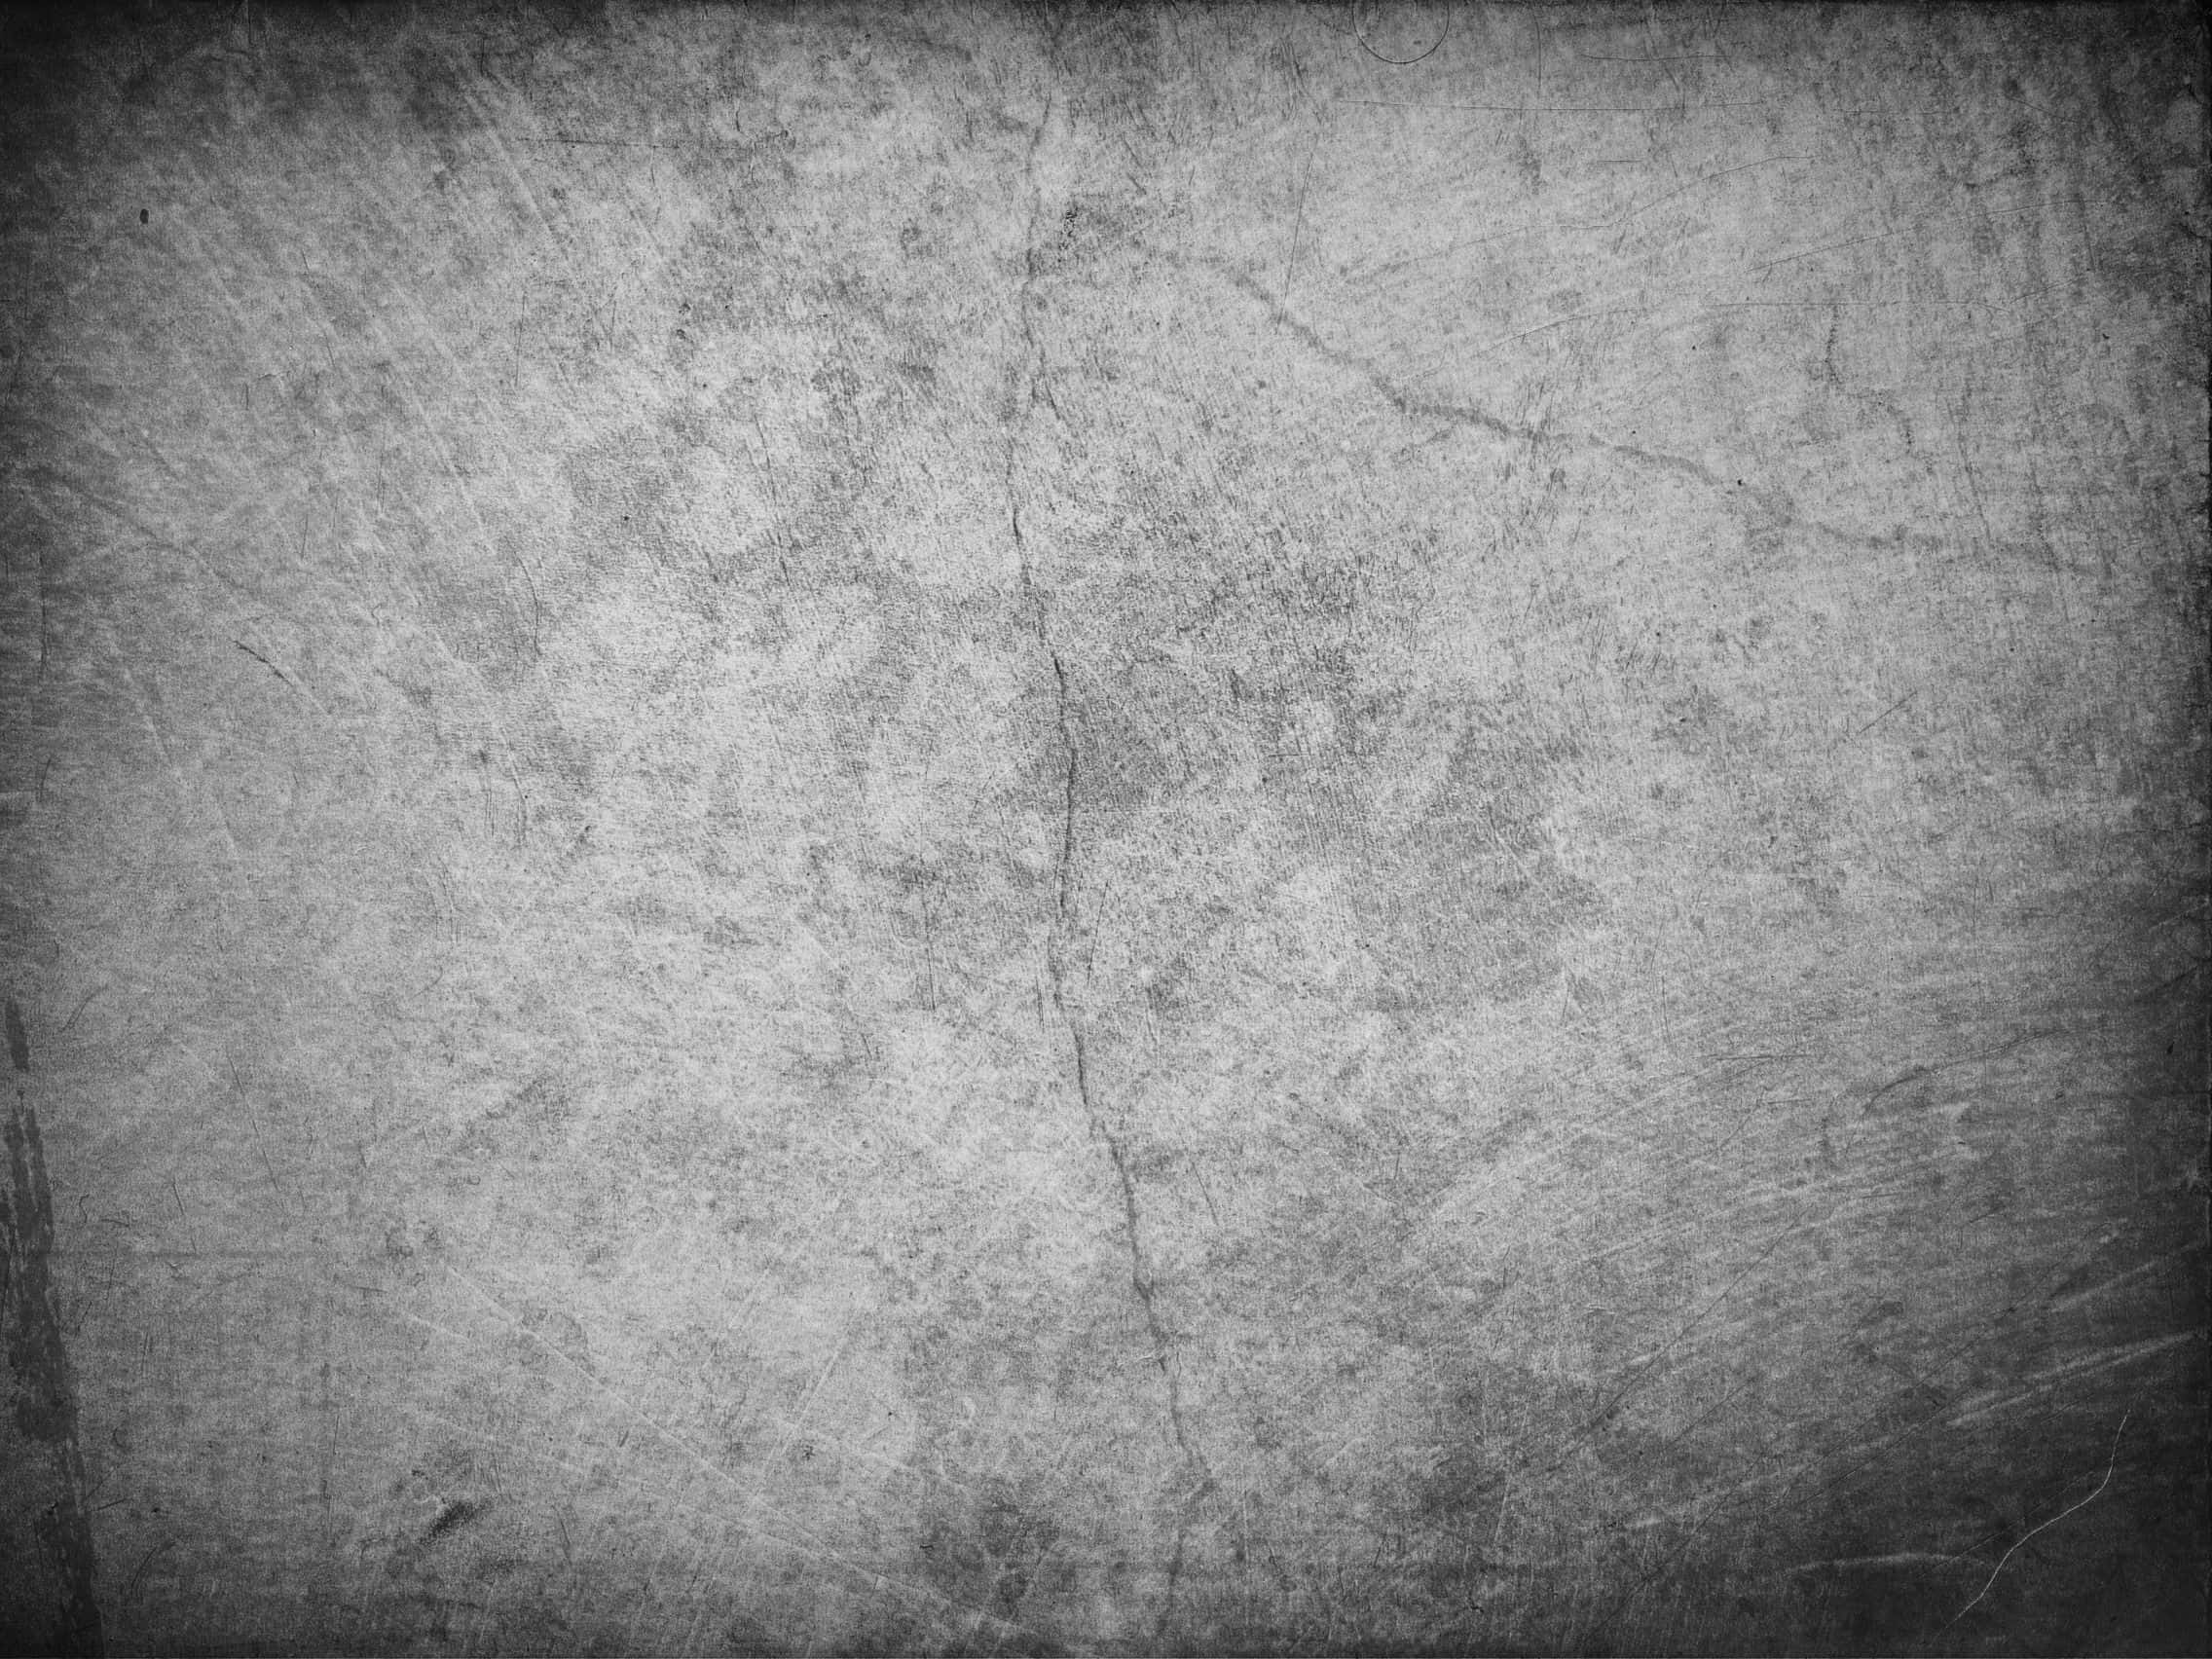 A grunge texture that can be used to add texture and depth to your background.